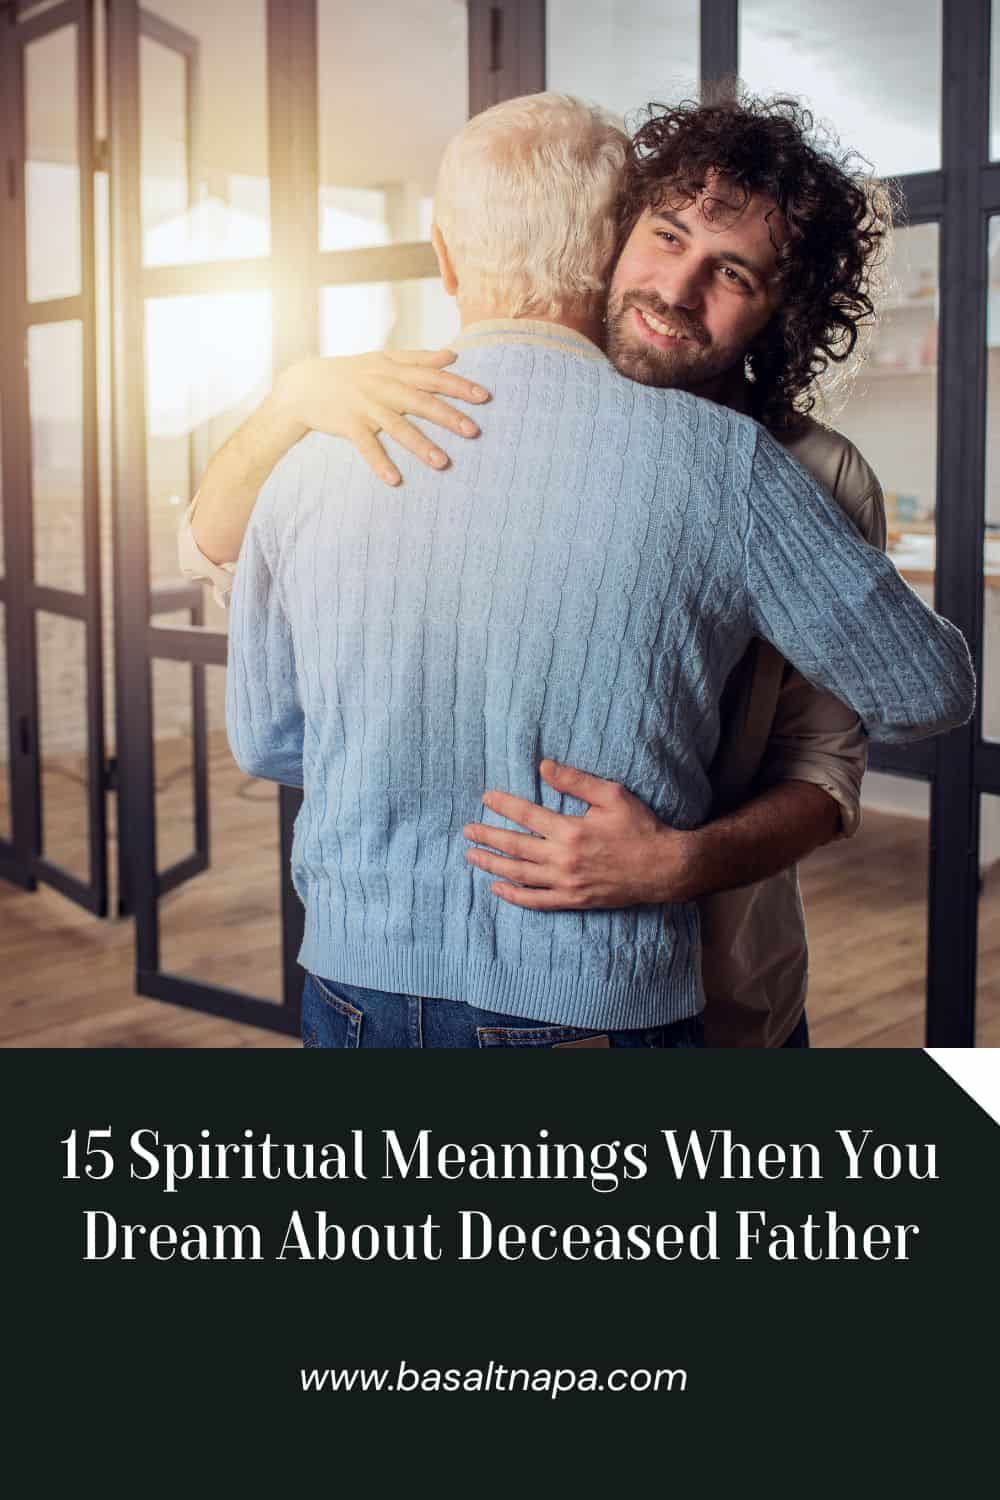 15 Spiritual Meanings When You Dream About Deceased Father